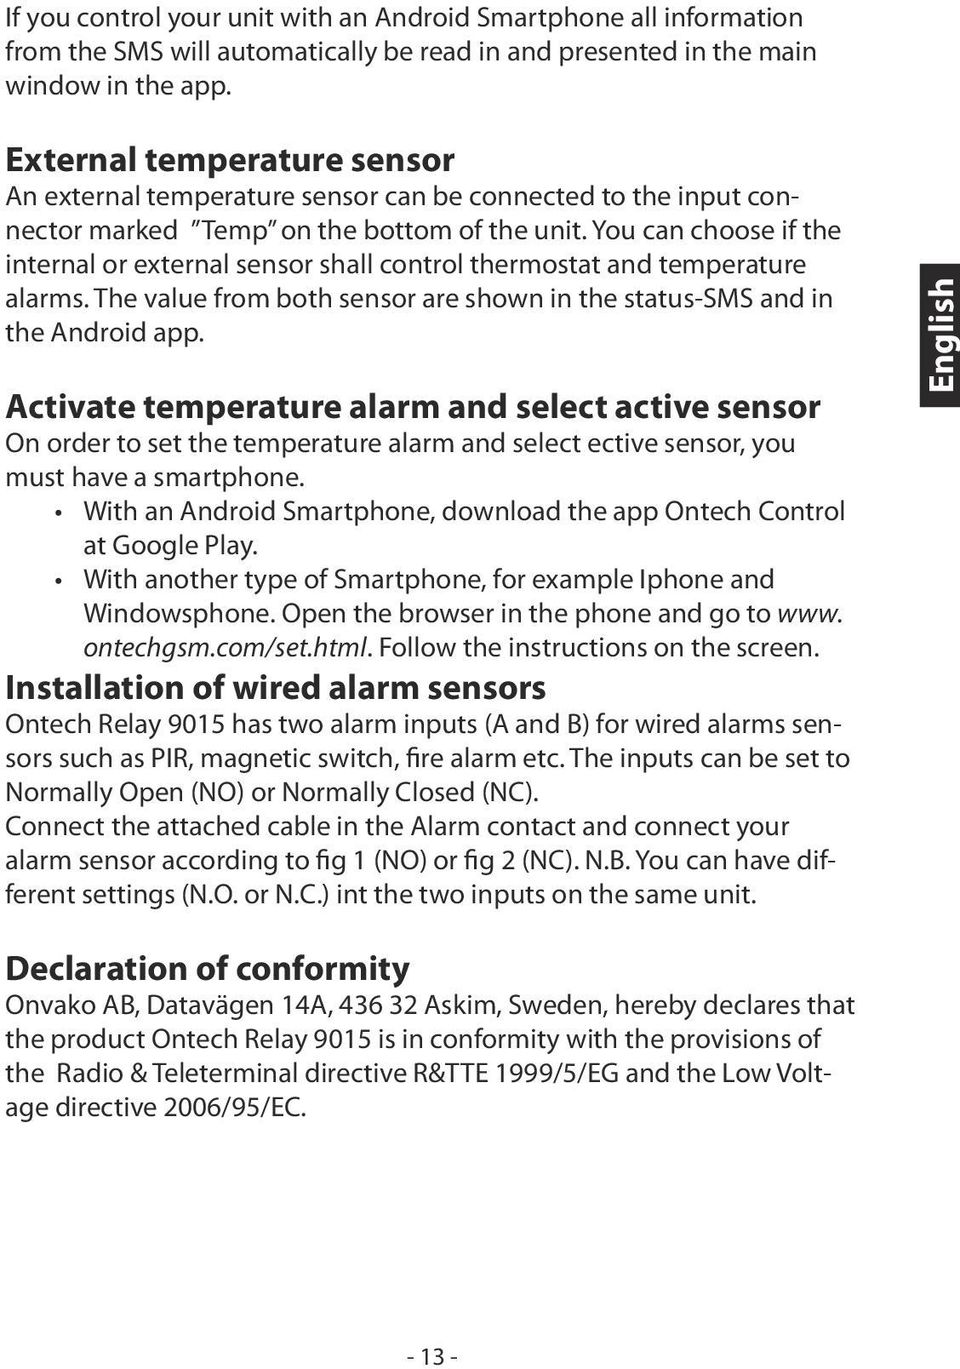 You can choose if the internal or external sensor shall control thermostat and temperature alarms. The value from both sensor are shown in the status-sms and in the Android app.